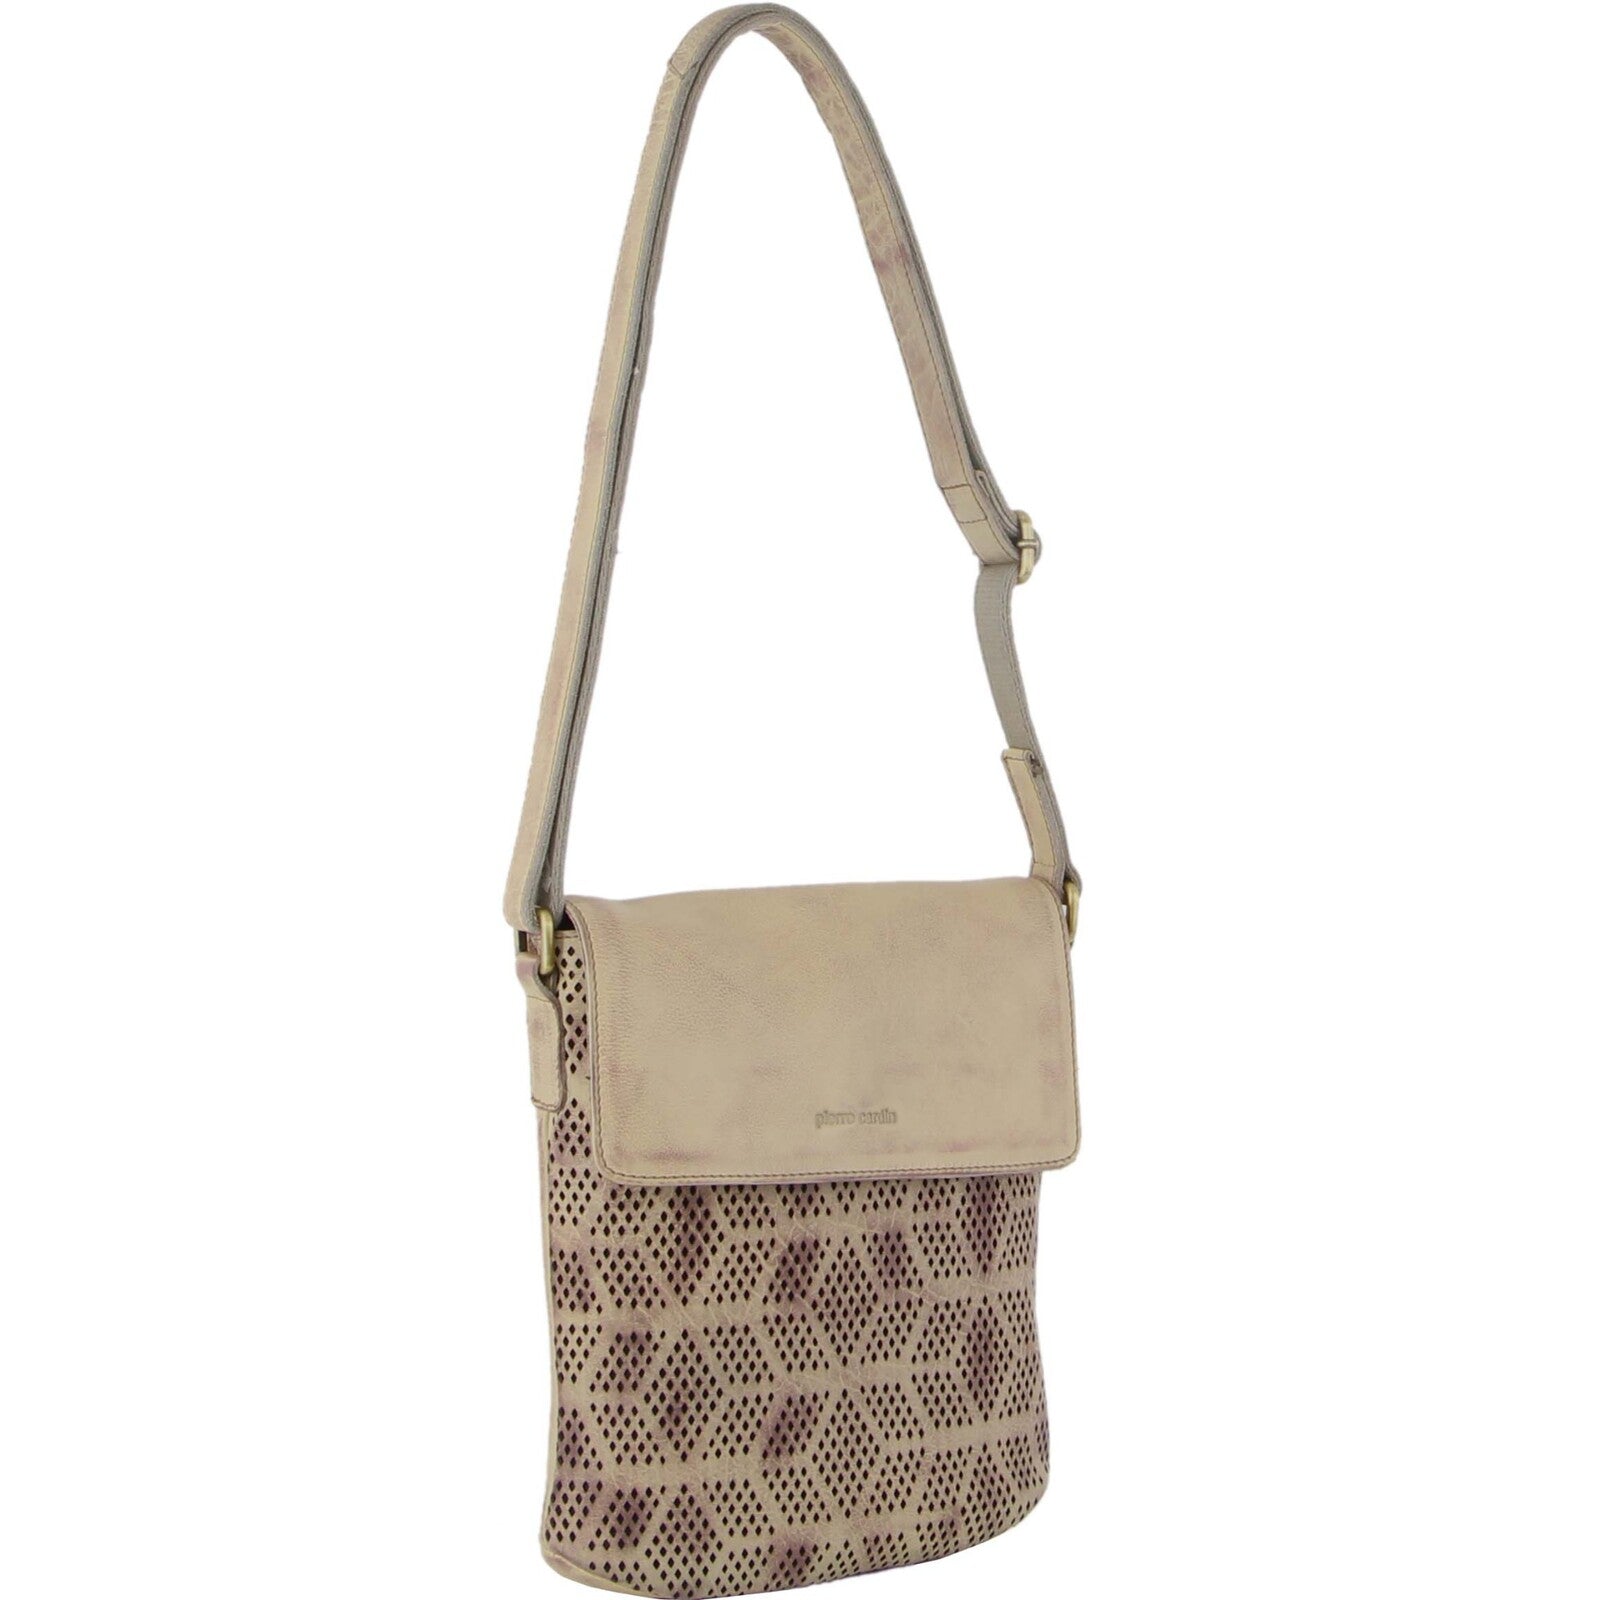 Leather Perforated Cross-Body Bag with Flap Closure - Latte